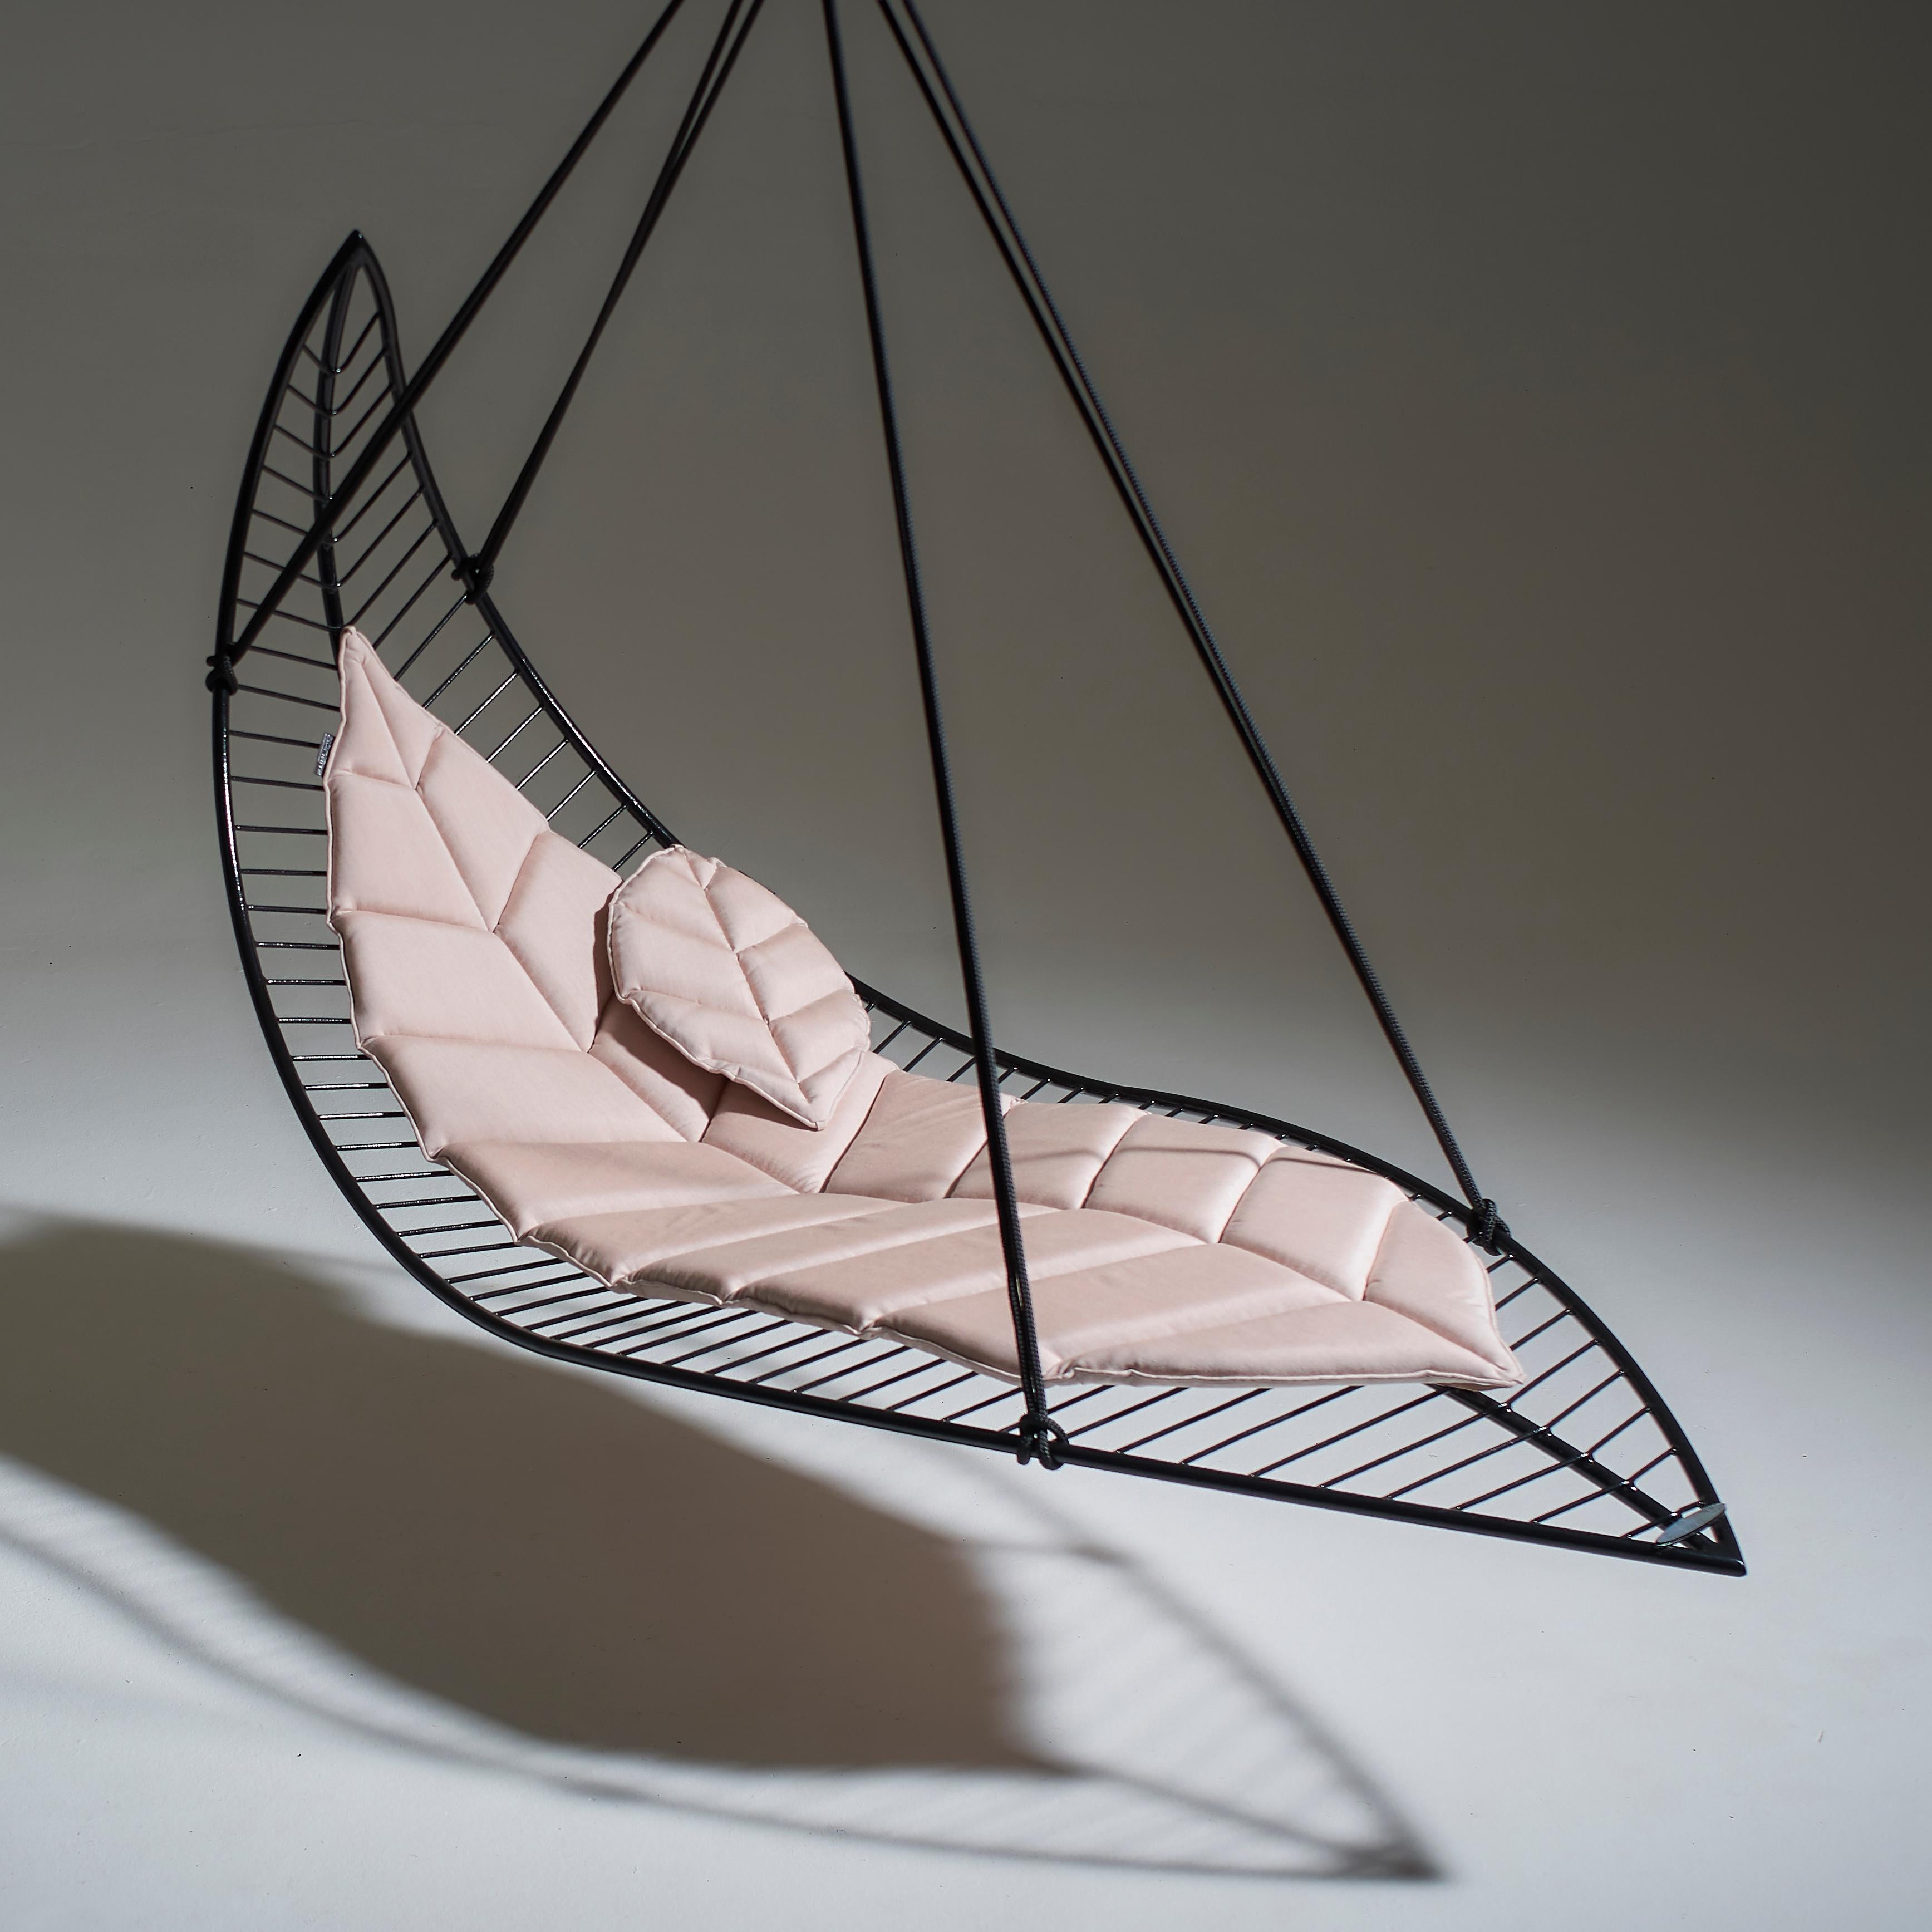 The Leaf hanging swing chair is fluid and organic. The chair is inspired by nature and is reminiscent of organic leaf shapes with its veins flowing out from the centre. It is simple and striking in its visual appeal.

The chair has been designed